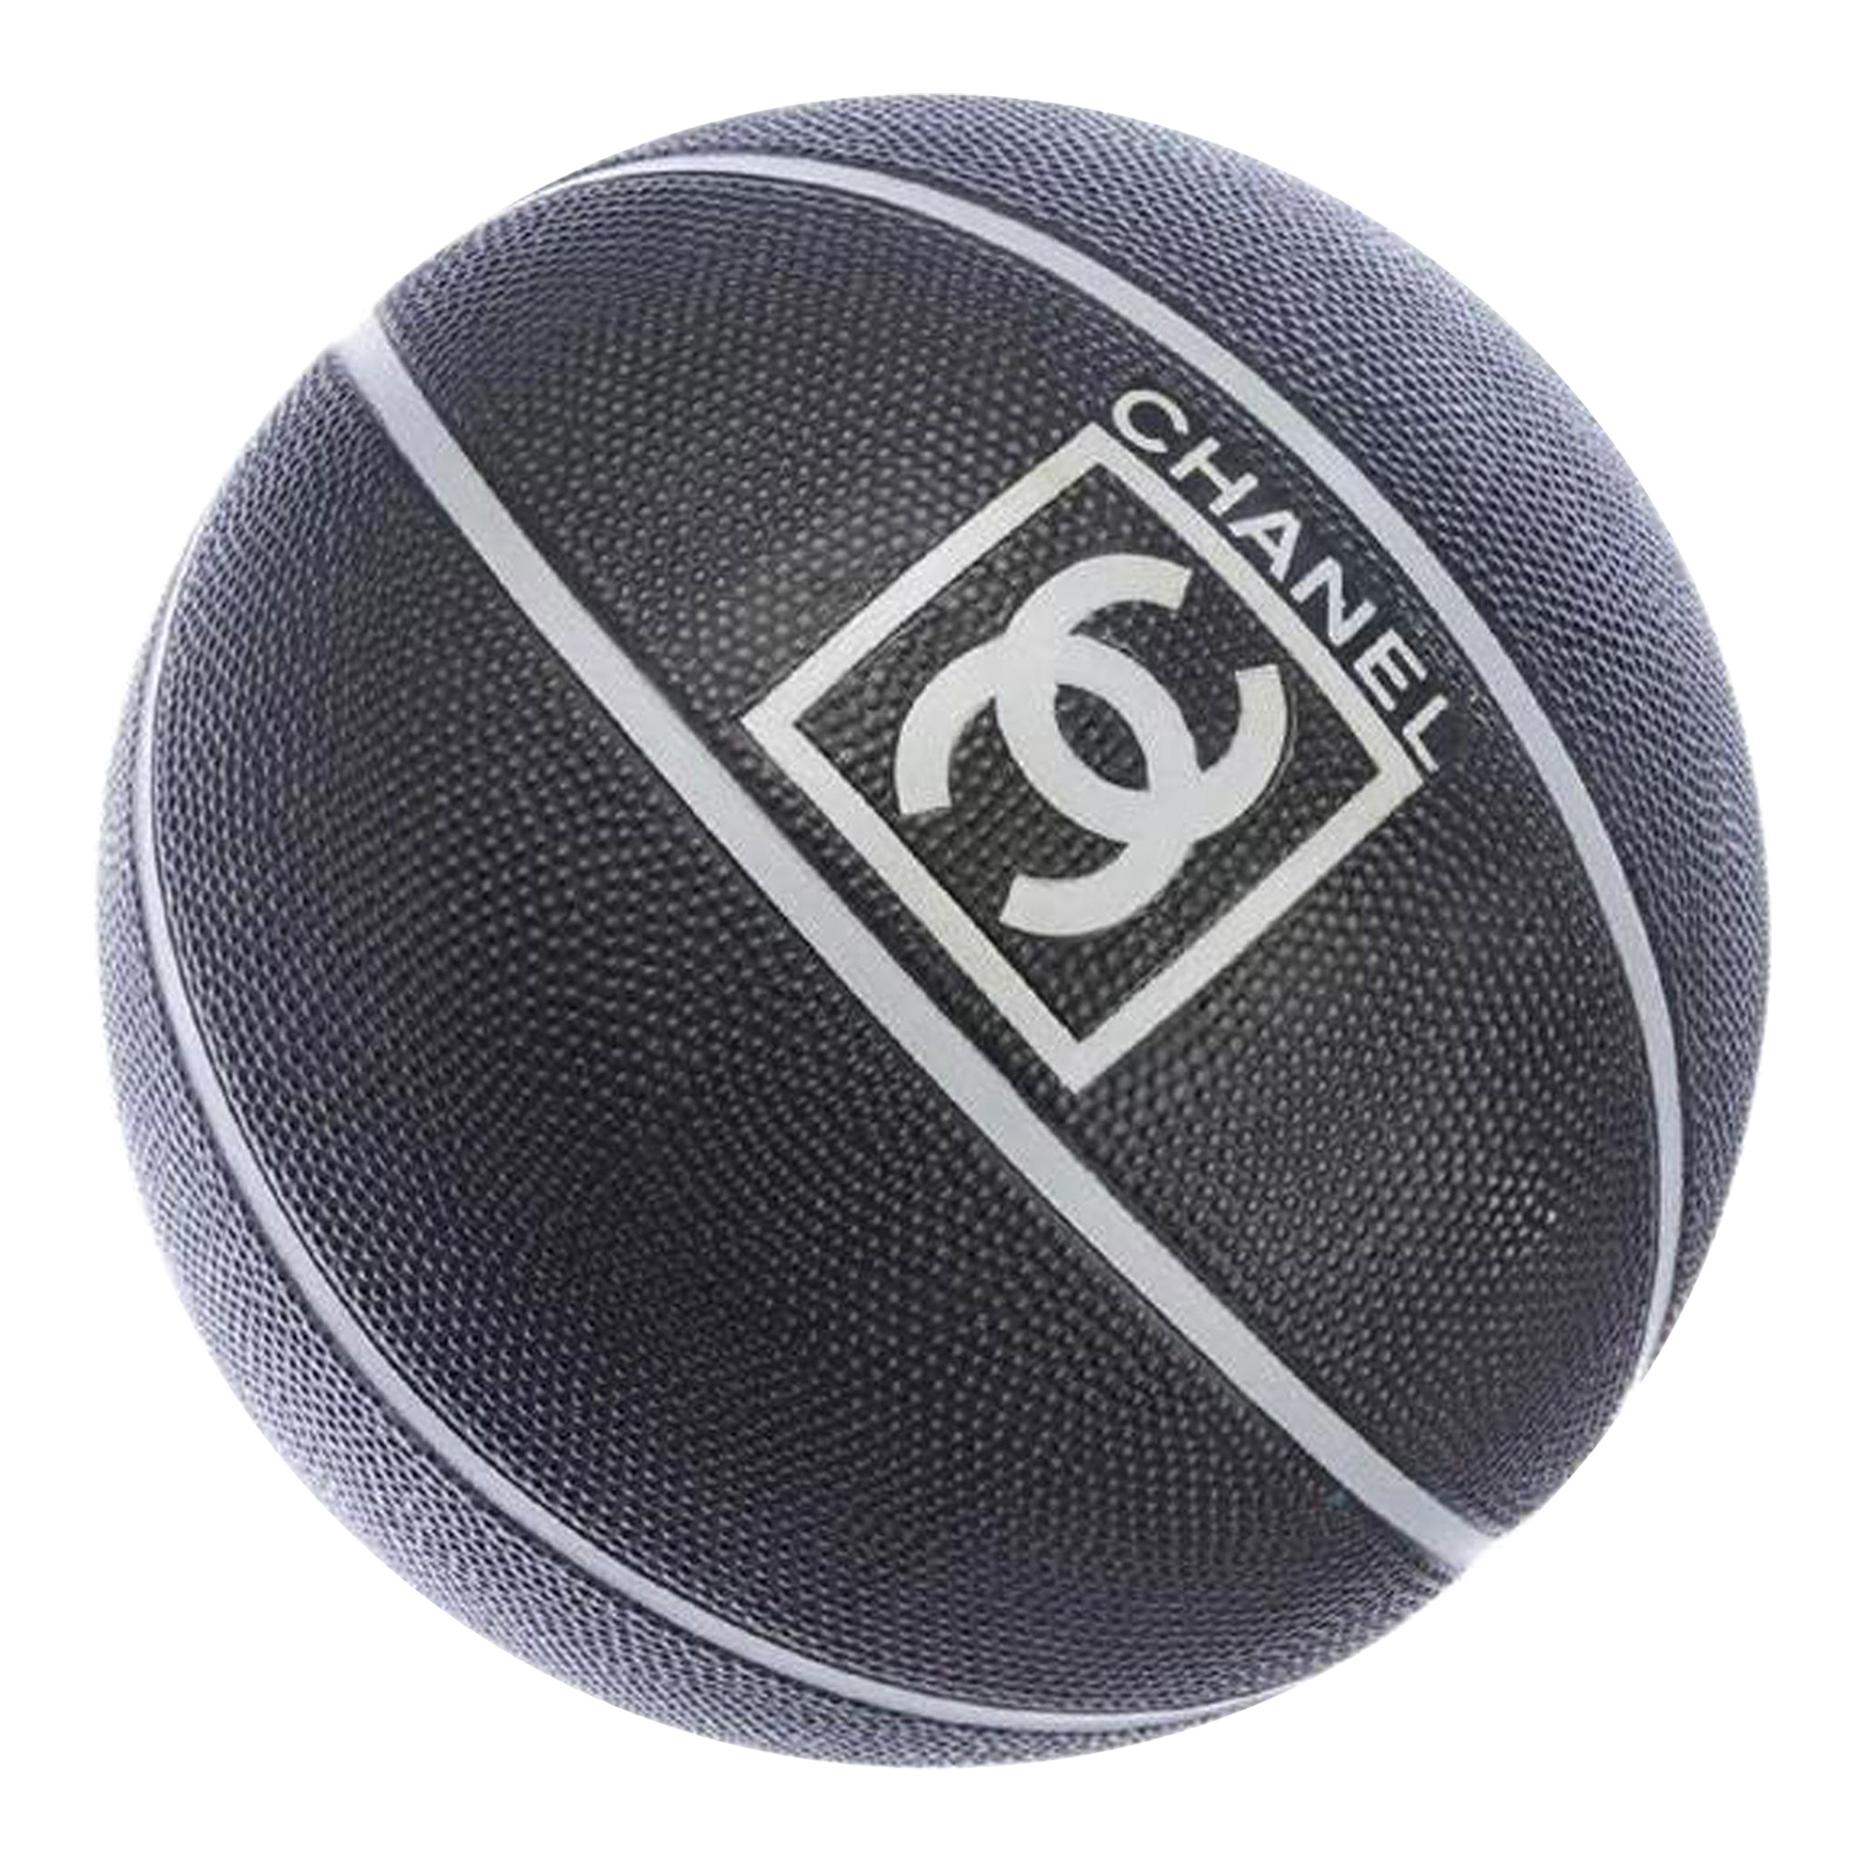 Chanel 90's Sport Collectors Basketball  In Good Condition For Sale In Miami, FL